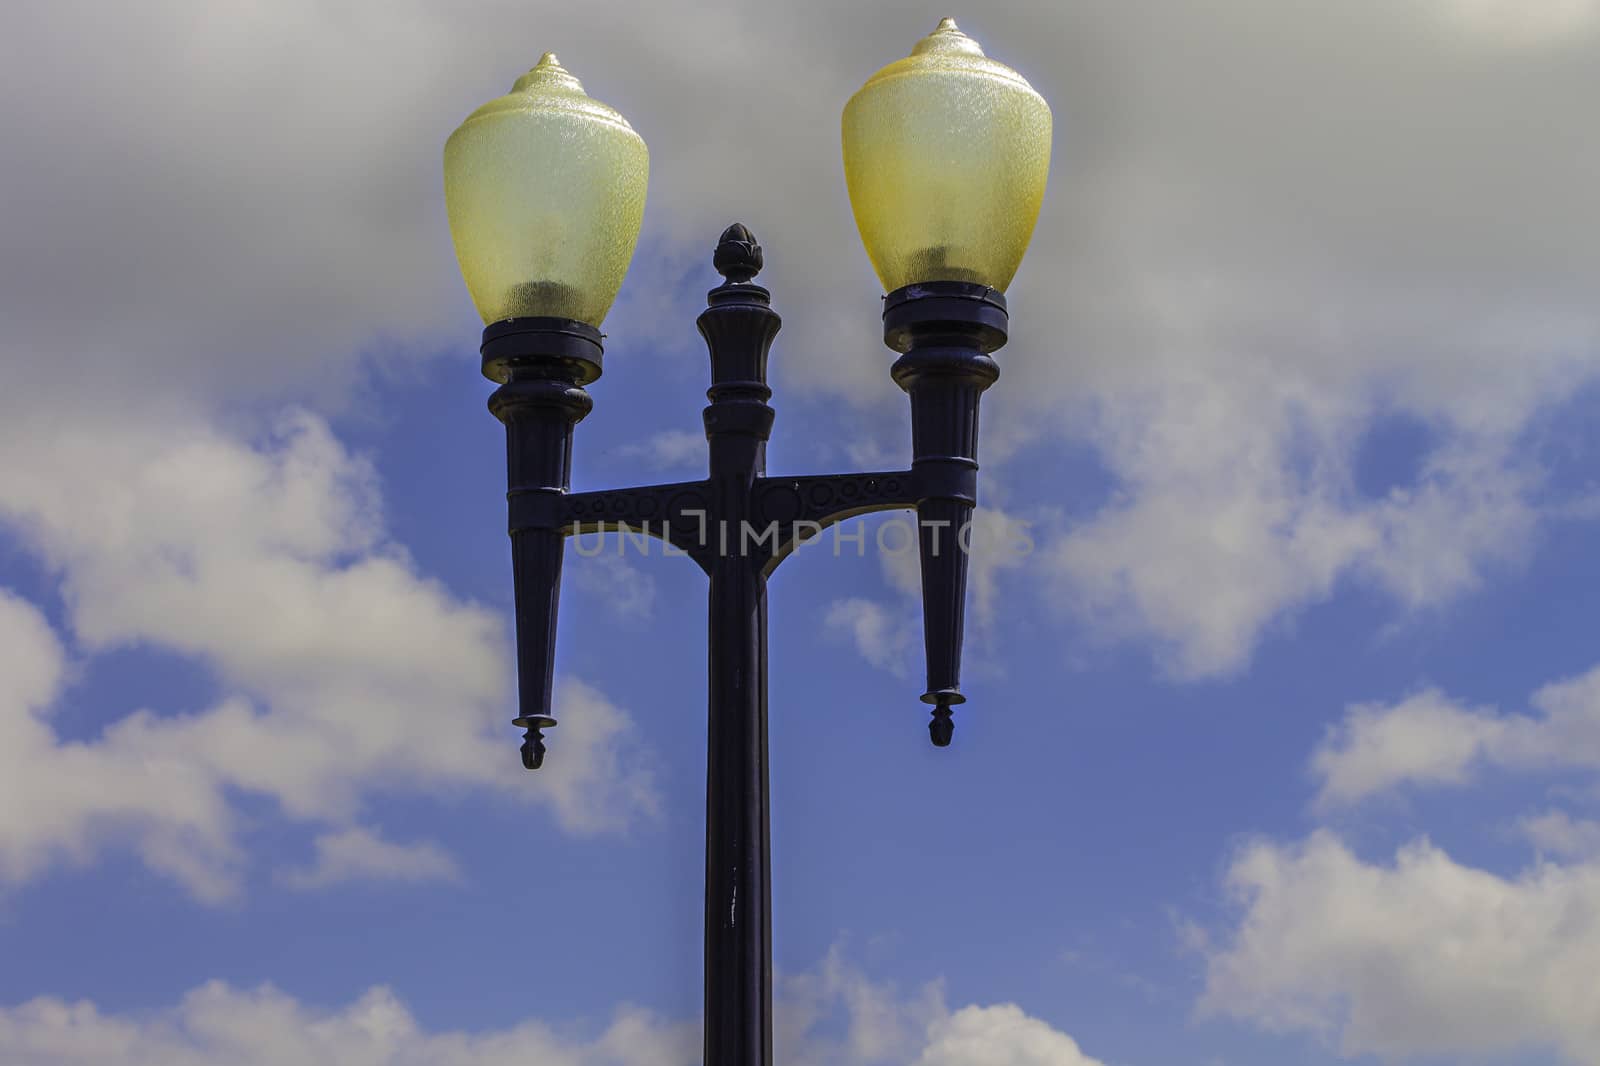 A vintage lamp post in an old park with a blue sky in the background.